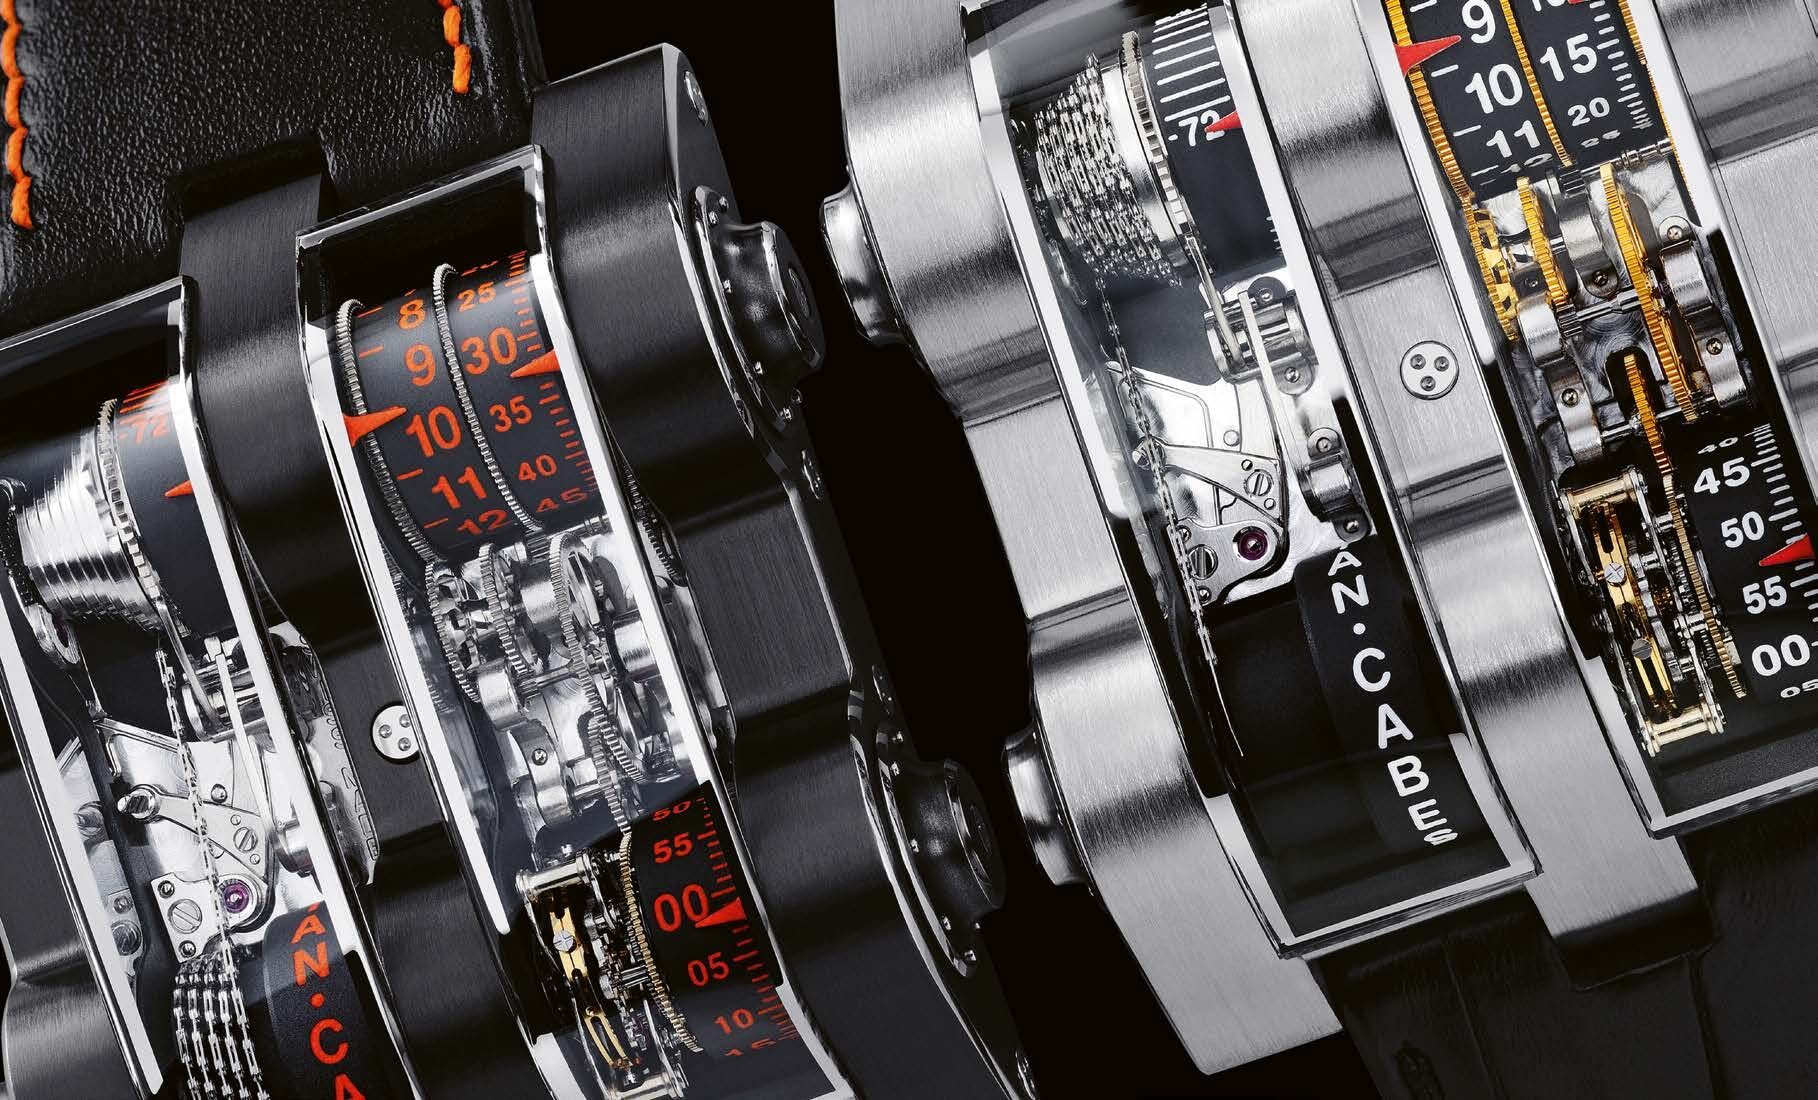 The World’s Most Expensive Watches